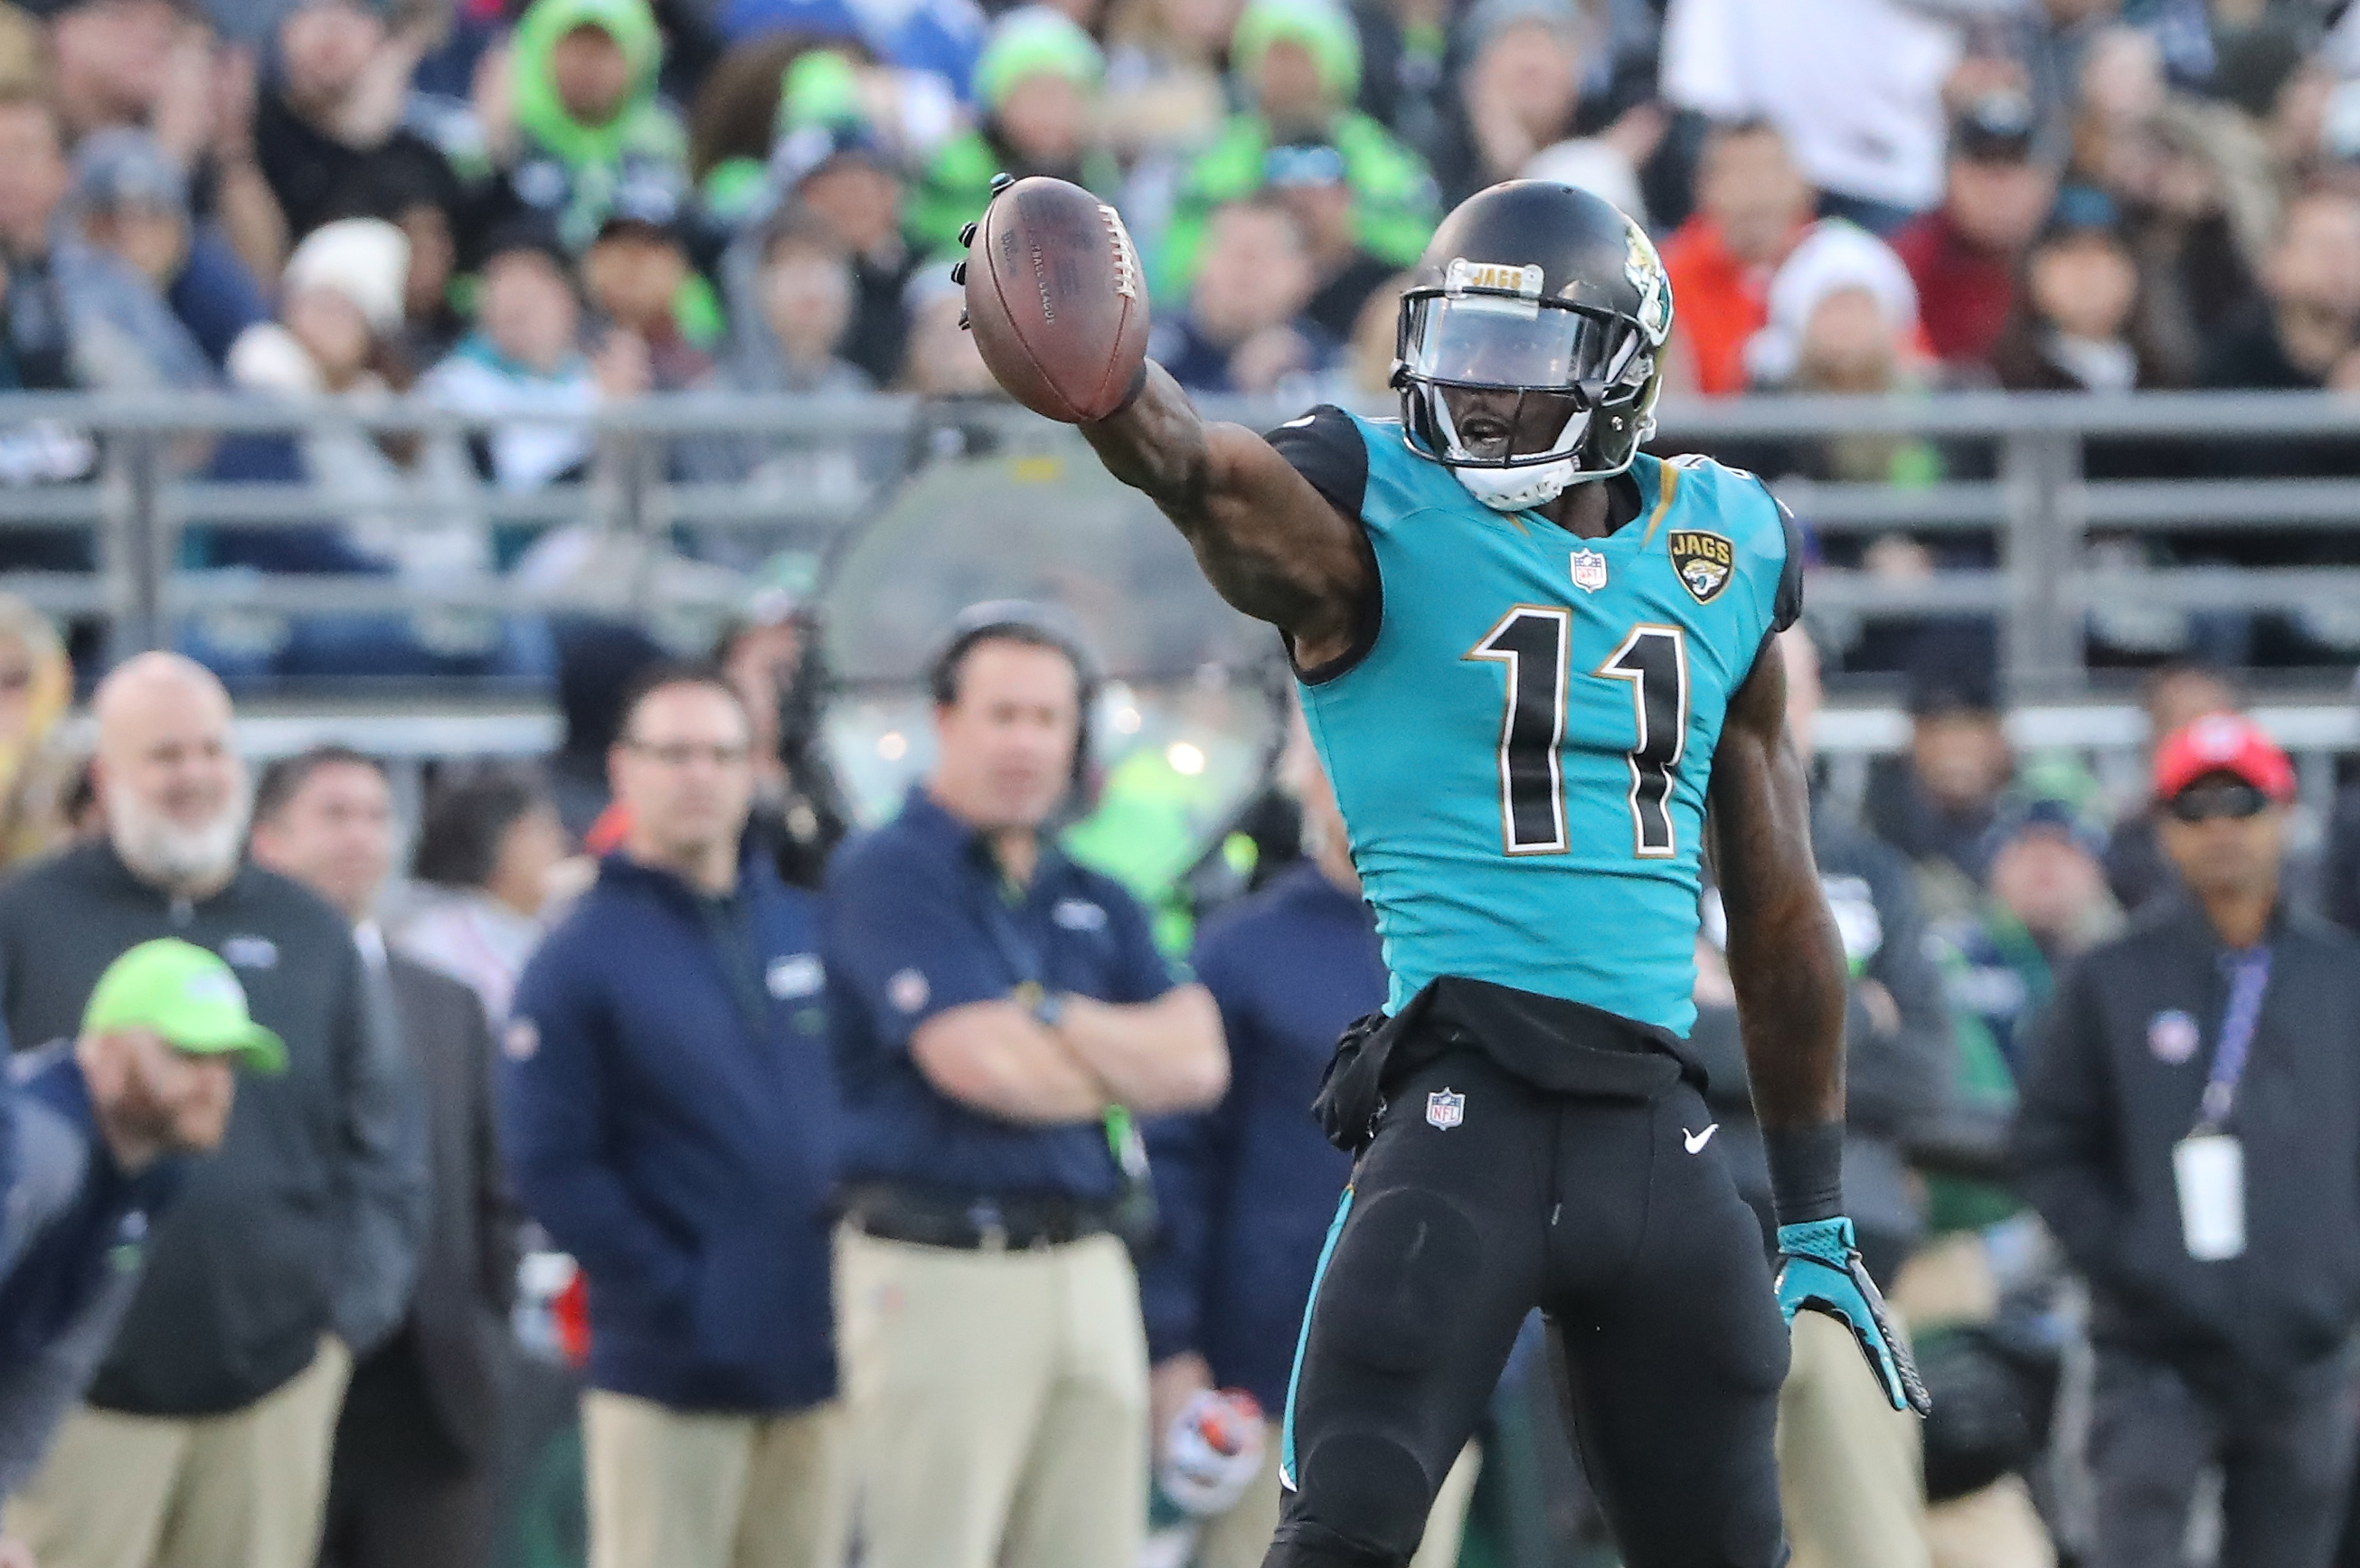 Jacksonville Jaguars: Once again, the receiving corps is deep